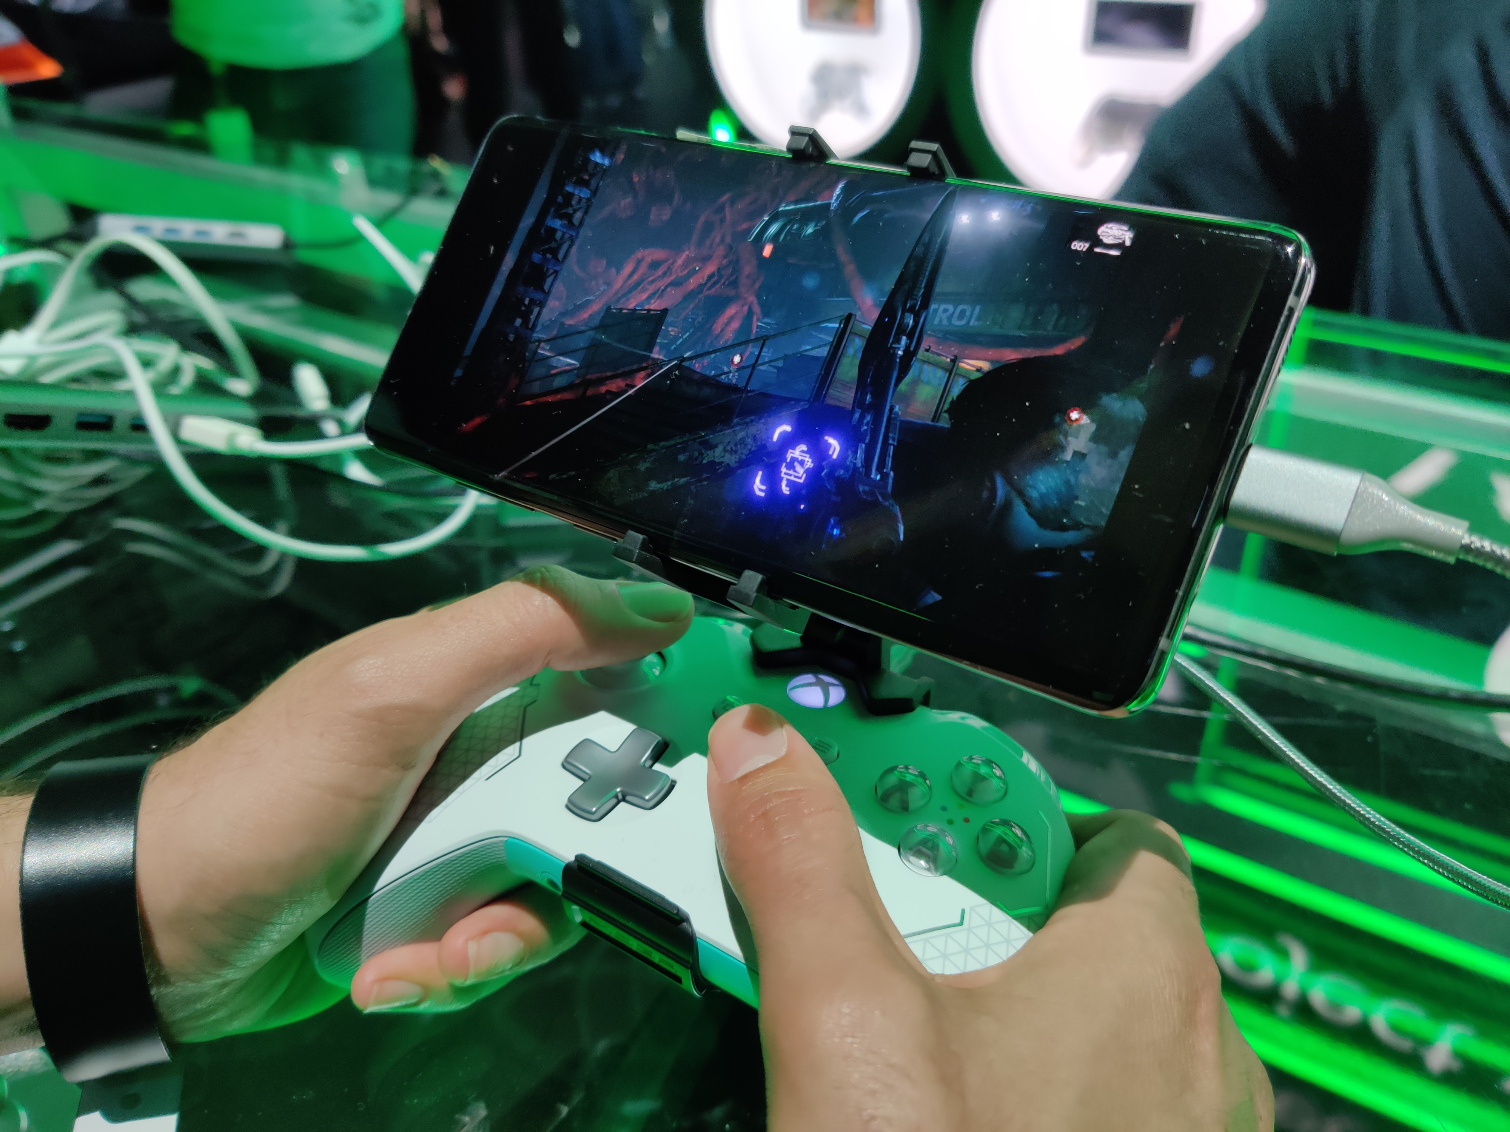 Xbox Project xCloud Hands-on Preview: The Crude Cloud